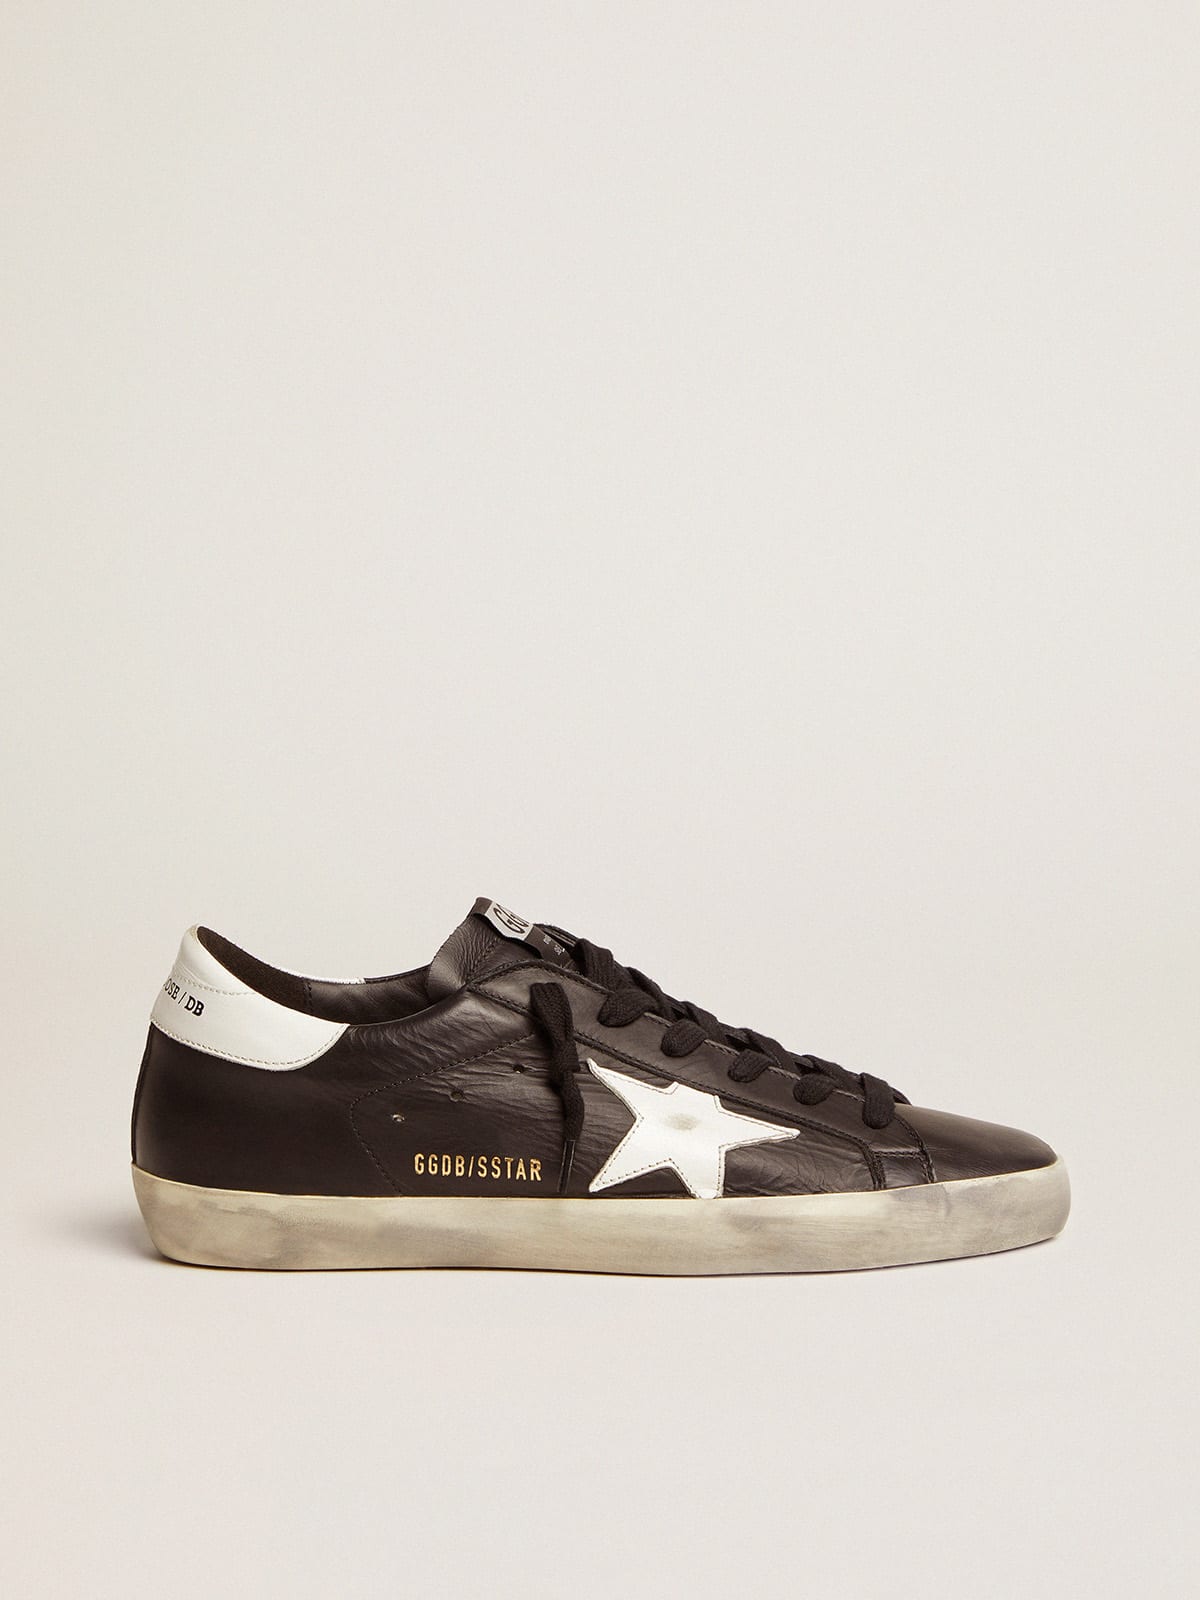 Women's Super-Star in silver leather with contrasting inserts